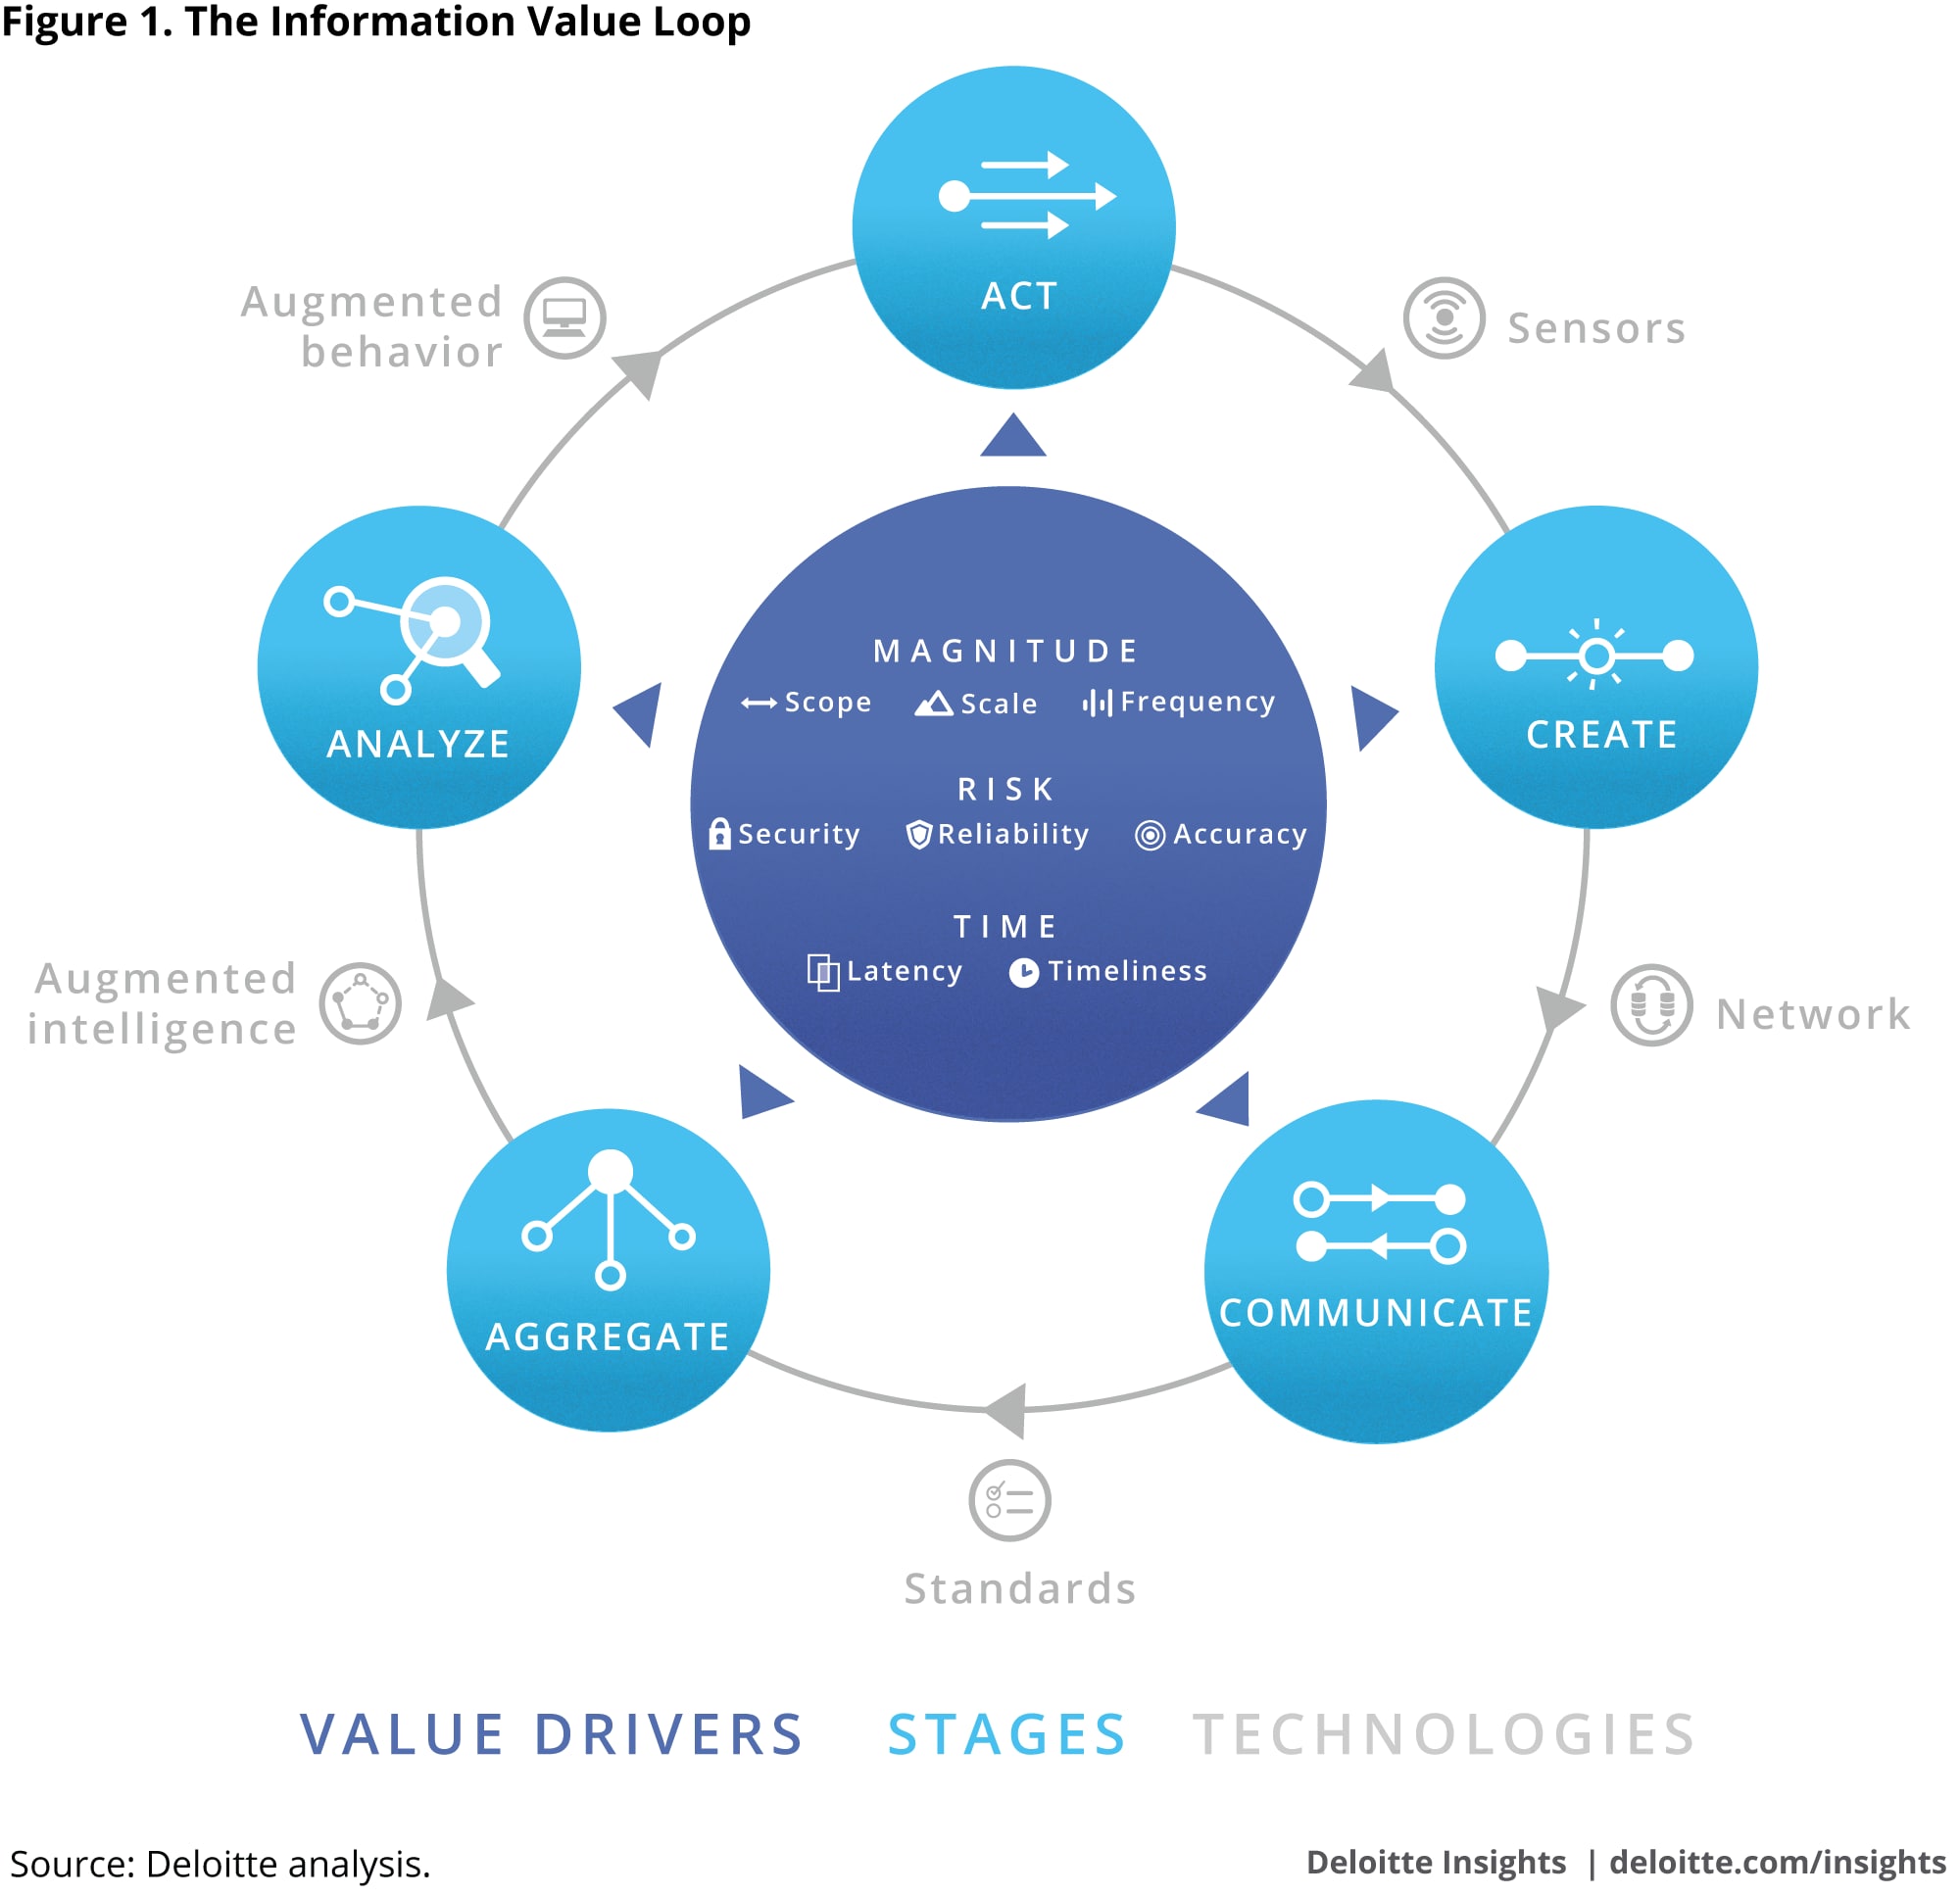 The Information Value Loop